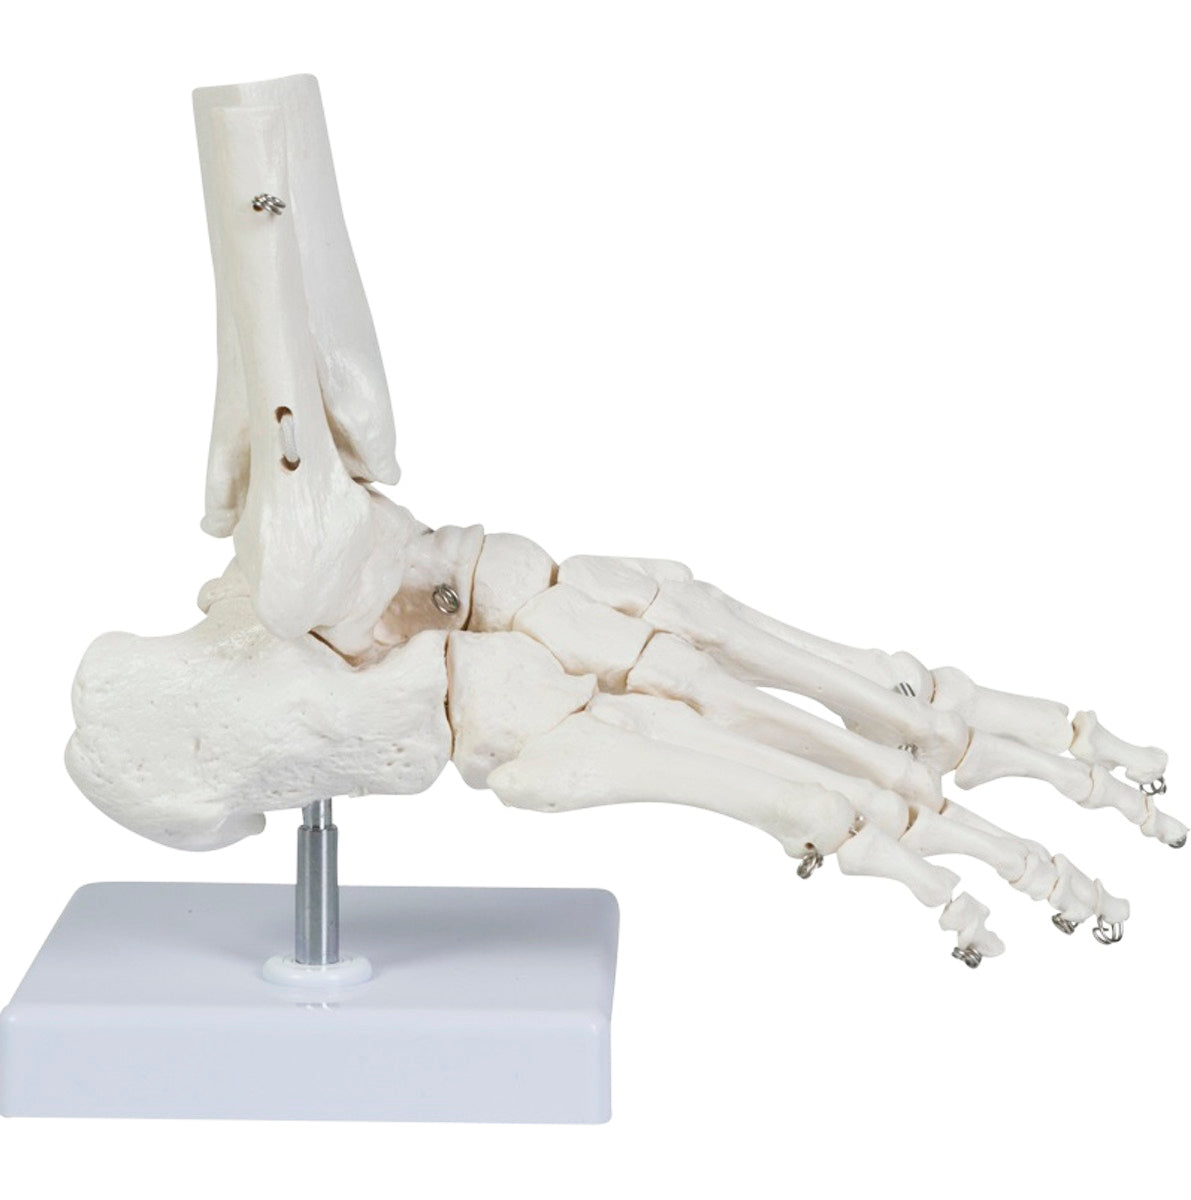 Flexible model of the skeleton of the foot as well as a bit of the tibia and fibula presented on a removable stand